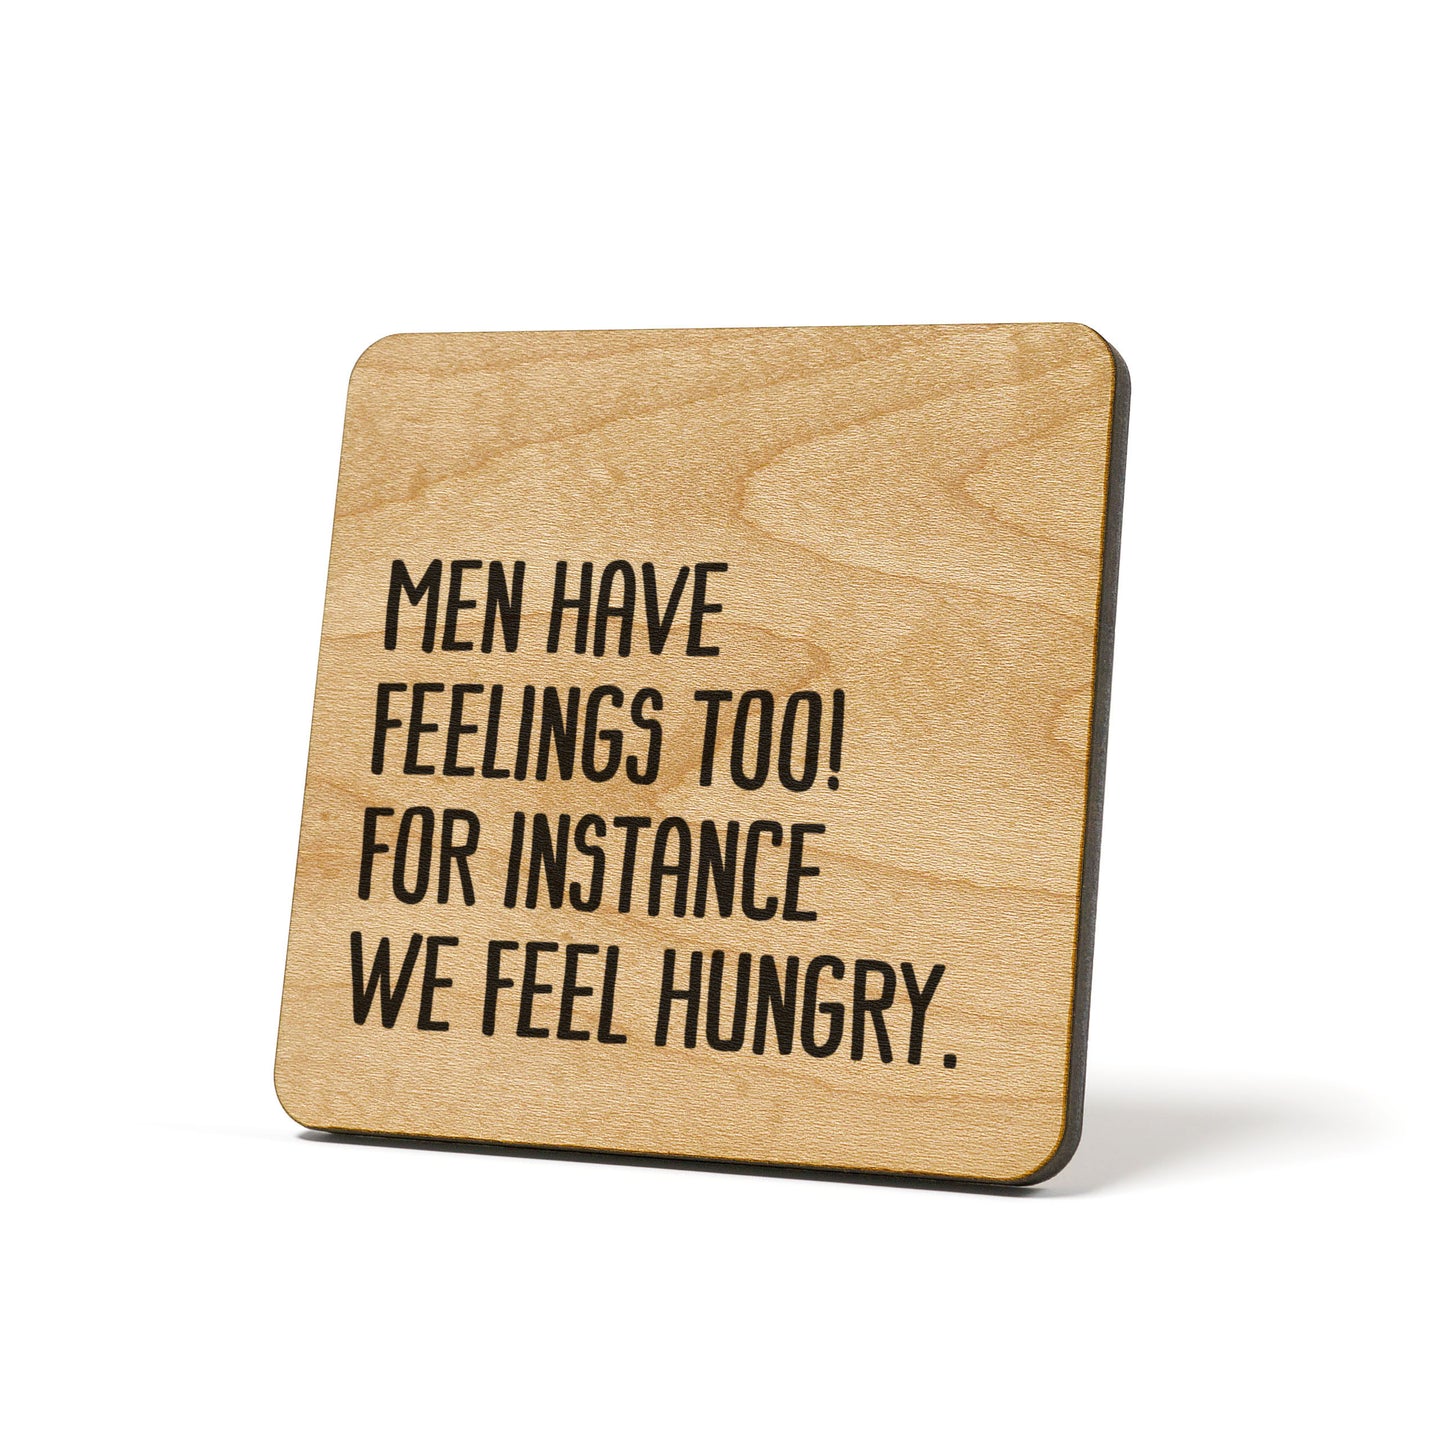 Men have feelings too! For instance we feel hungry Quote Coaster